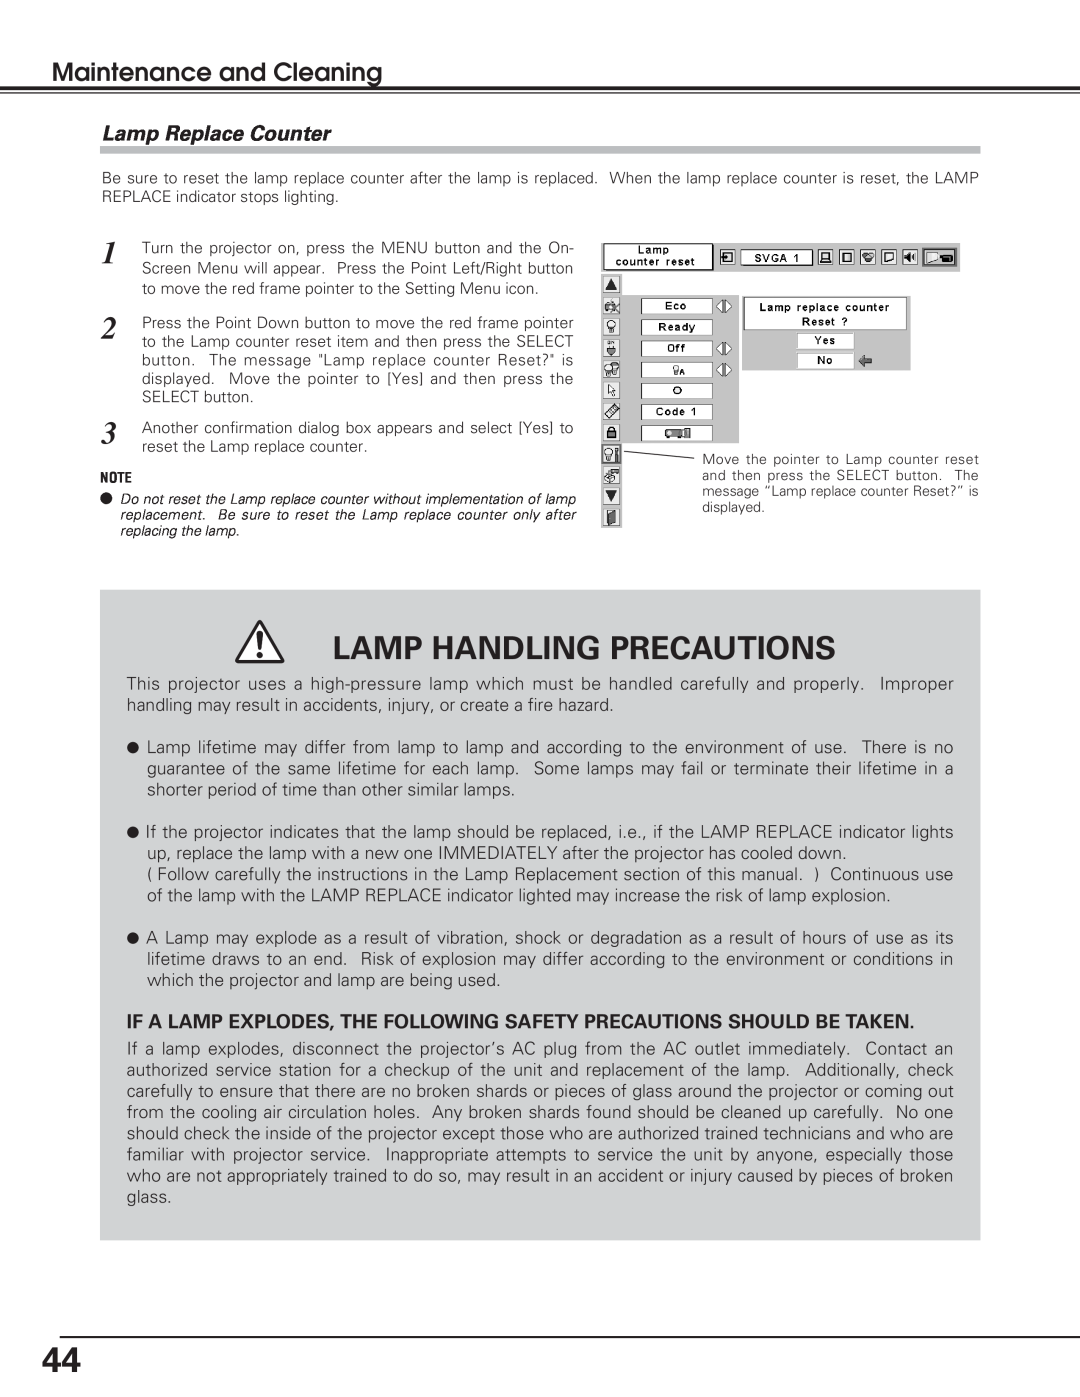 Christie Digital Systems 38-VIV208-01 user manual Lamp Replace Counter, Lamp Handling Precautions, Maintenance and Cleaning 